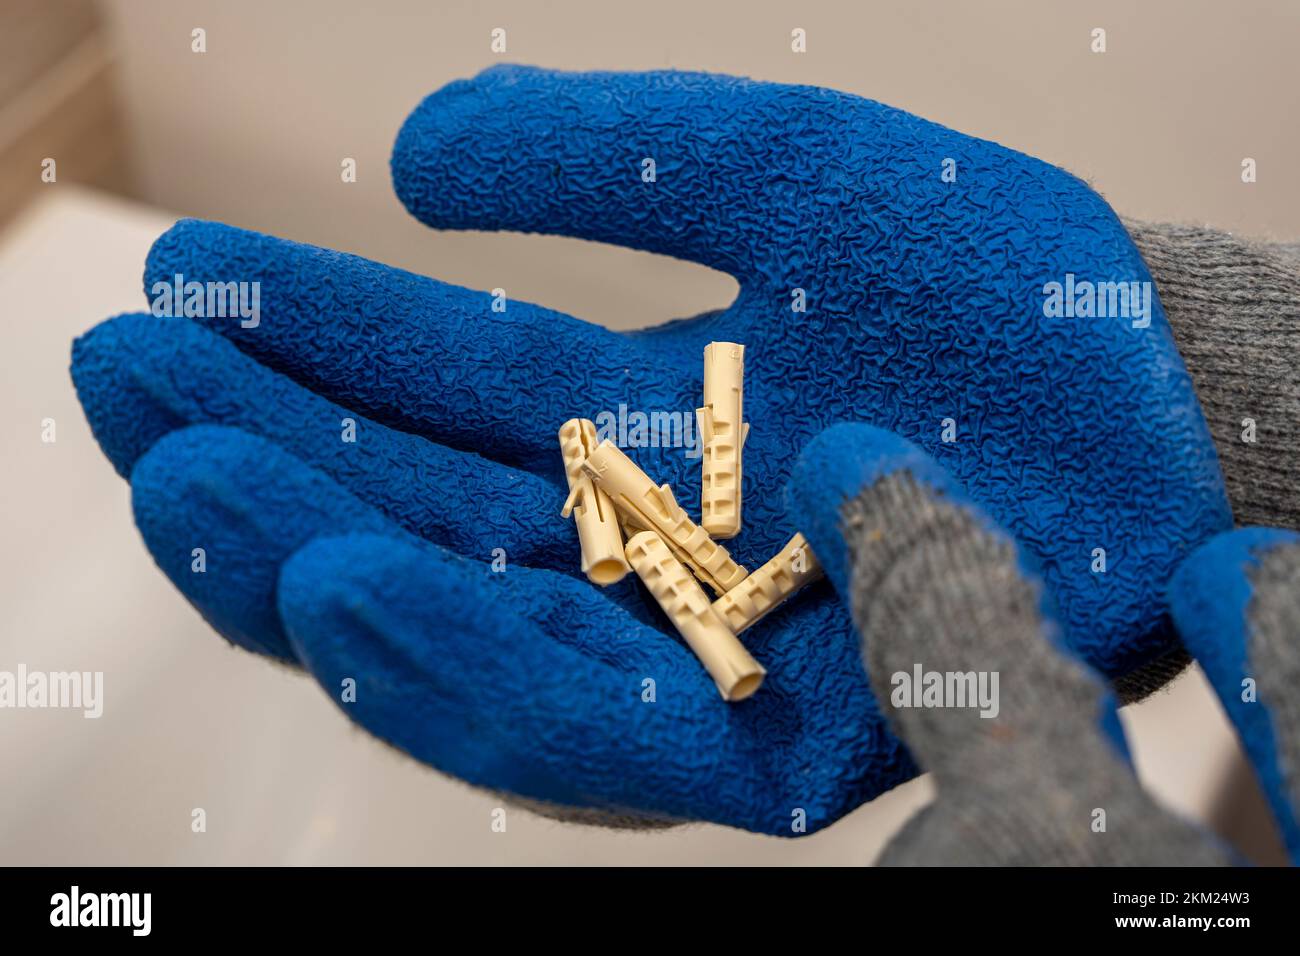 worker's hand in a protective glove holds several plastic dowel pins Stock Photo